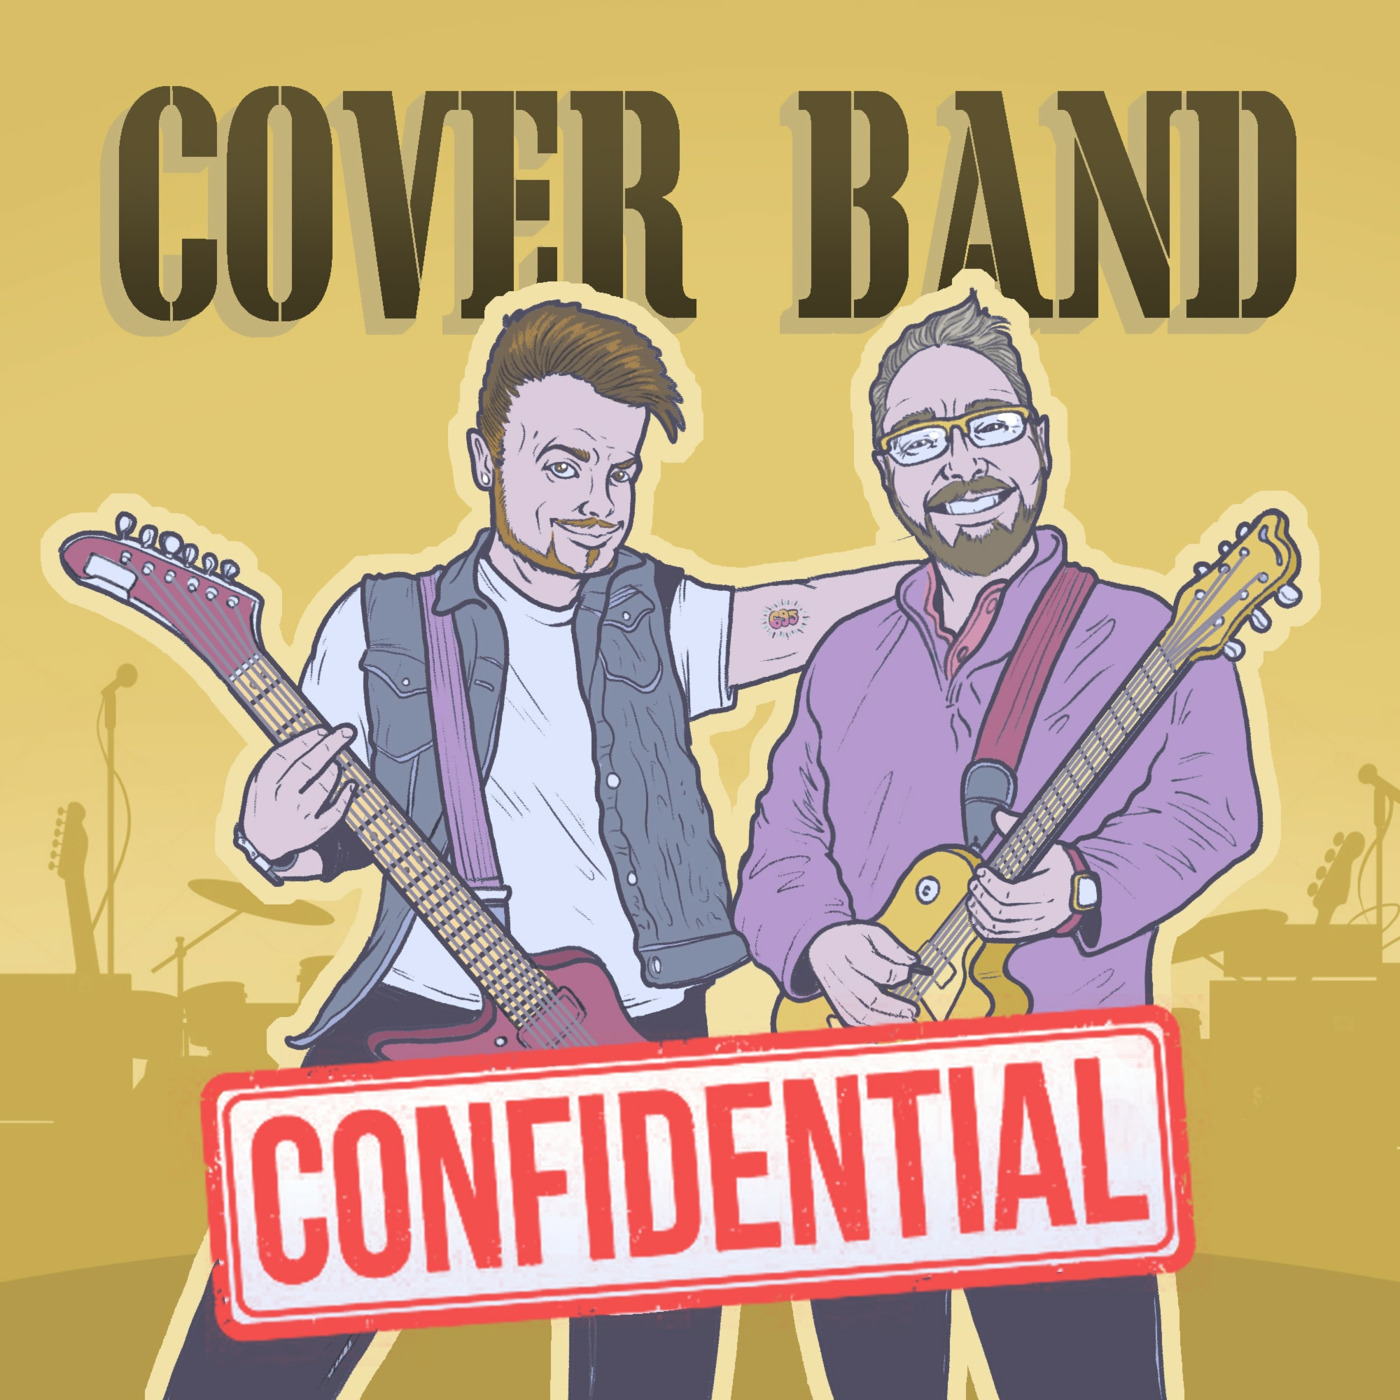 Cover Band Confidential's Podcast